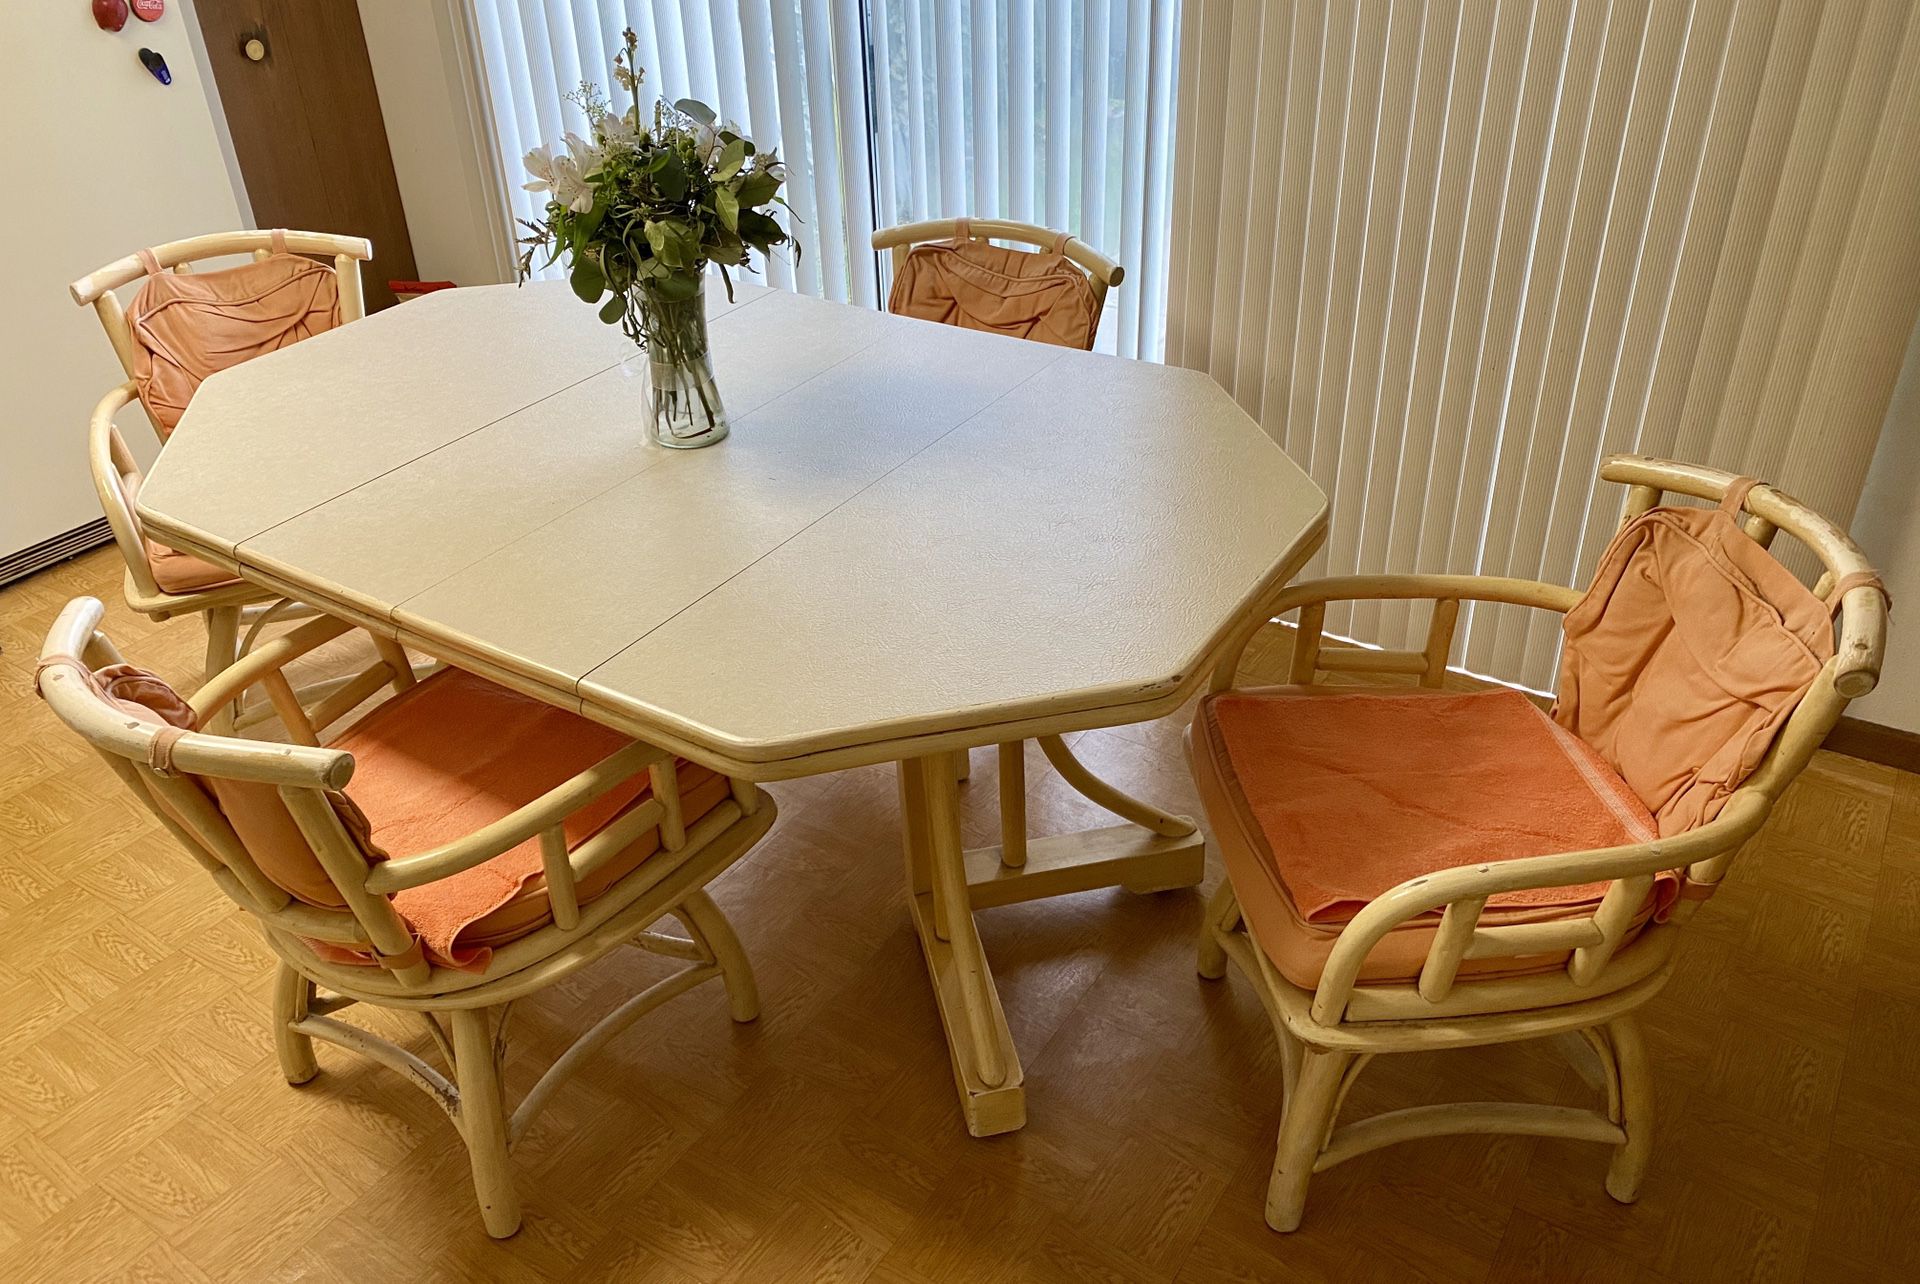 LARGE KITCHEN TABLE & CHAIRS